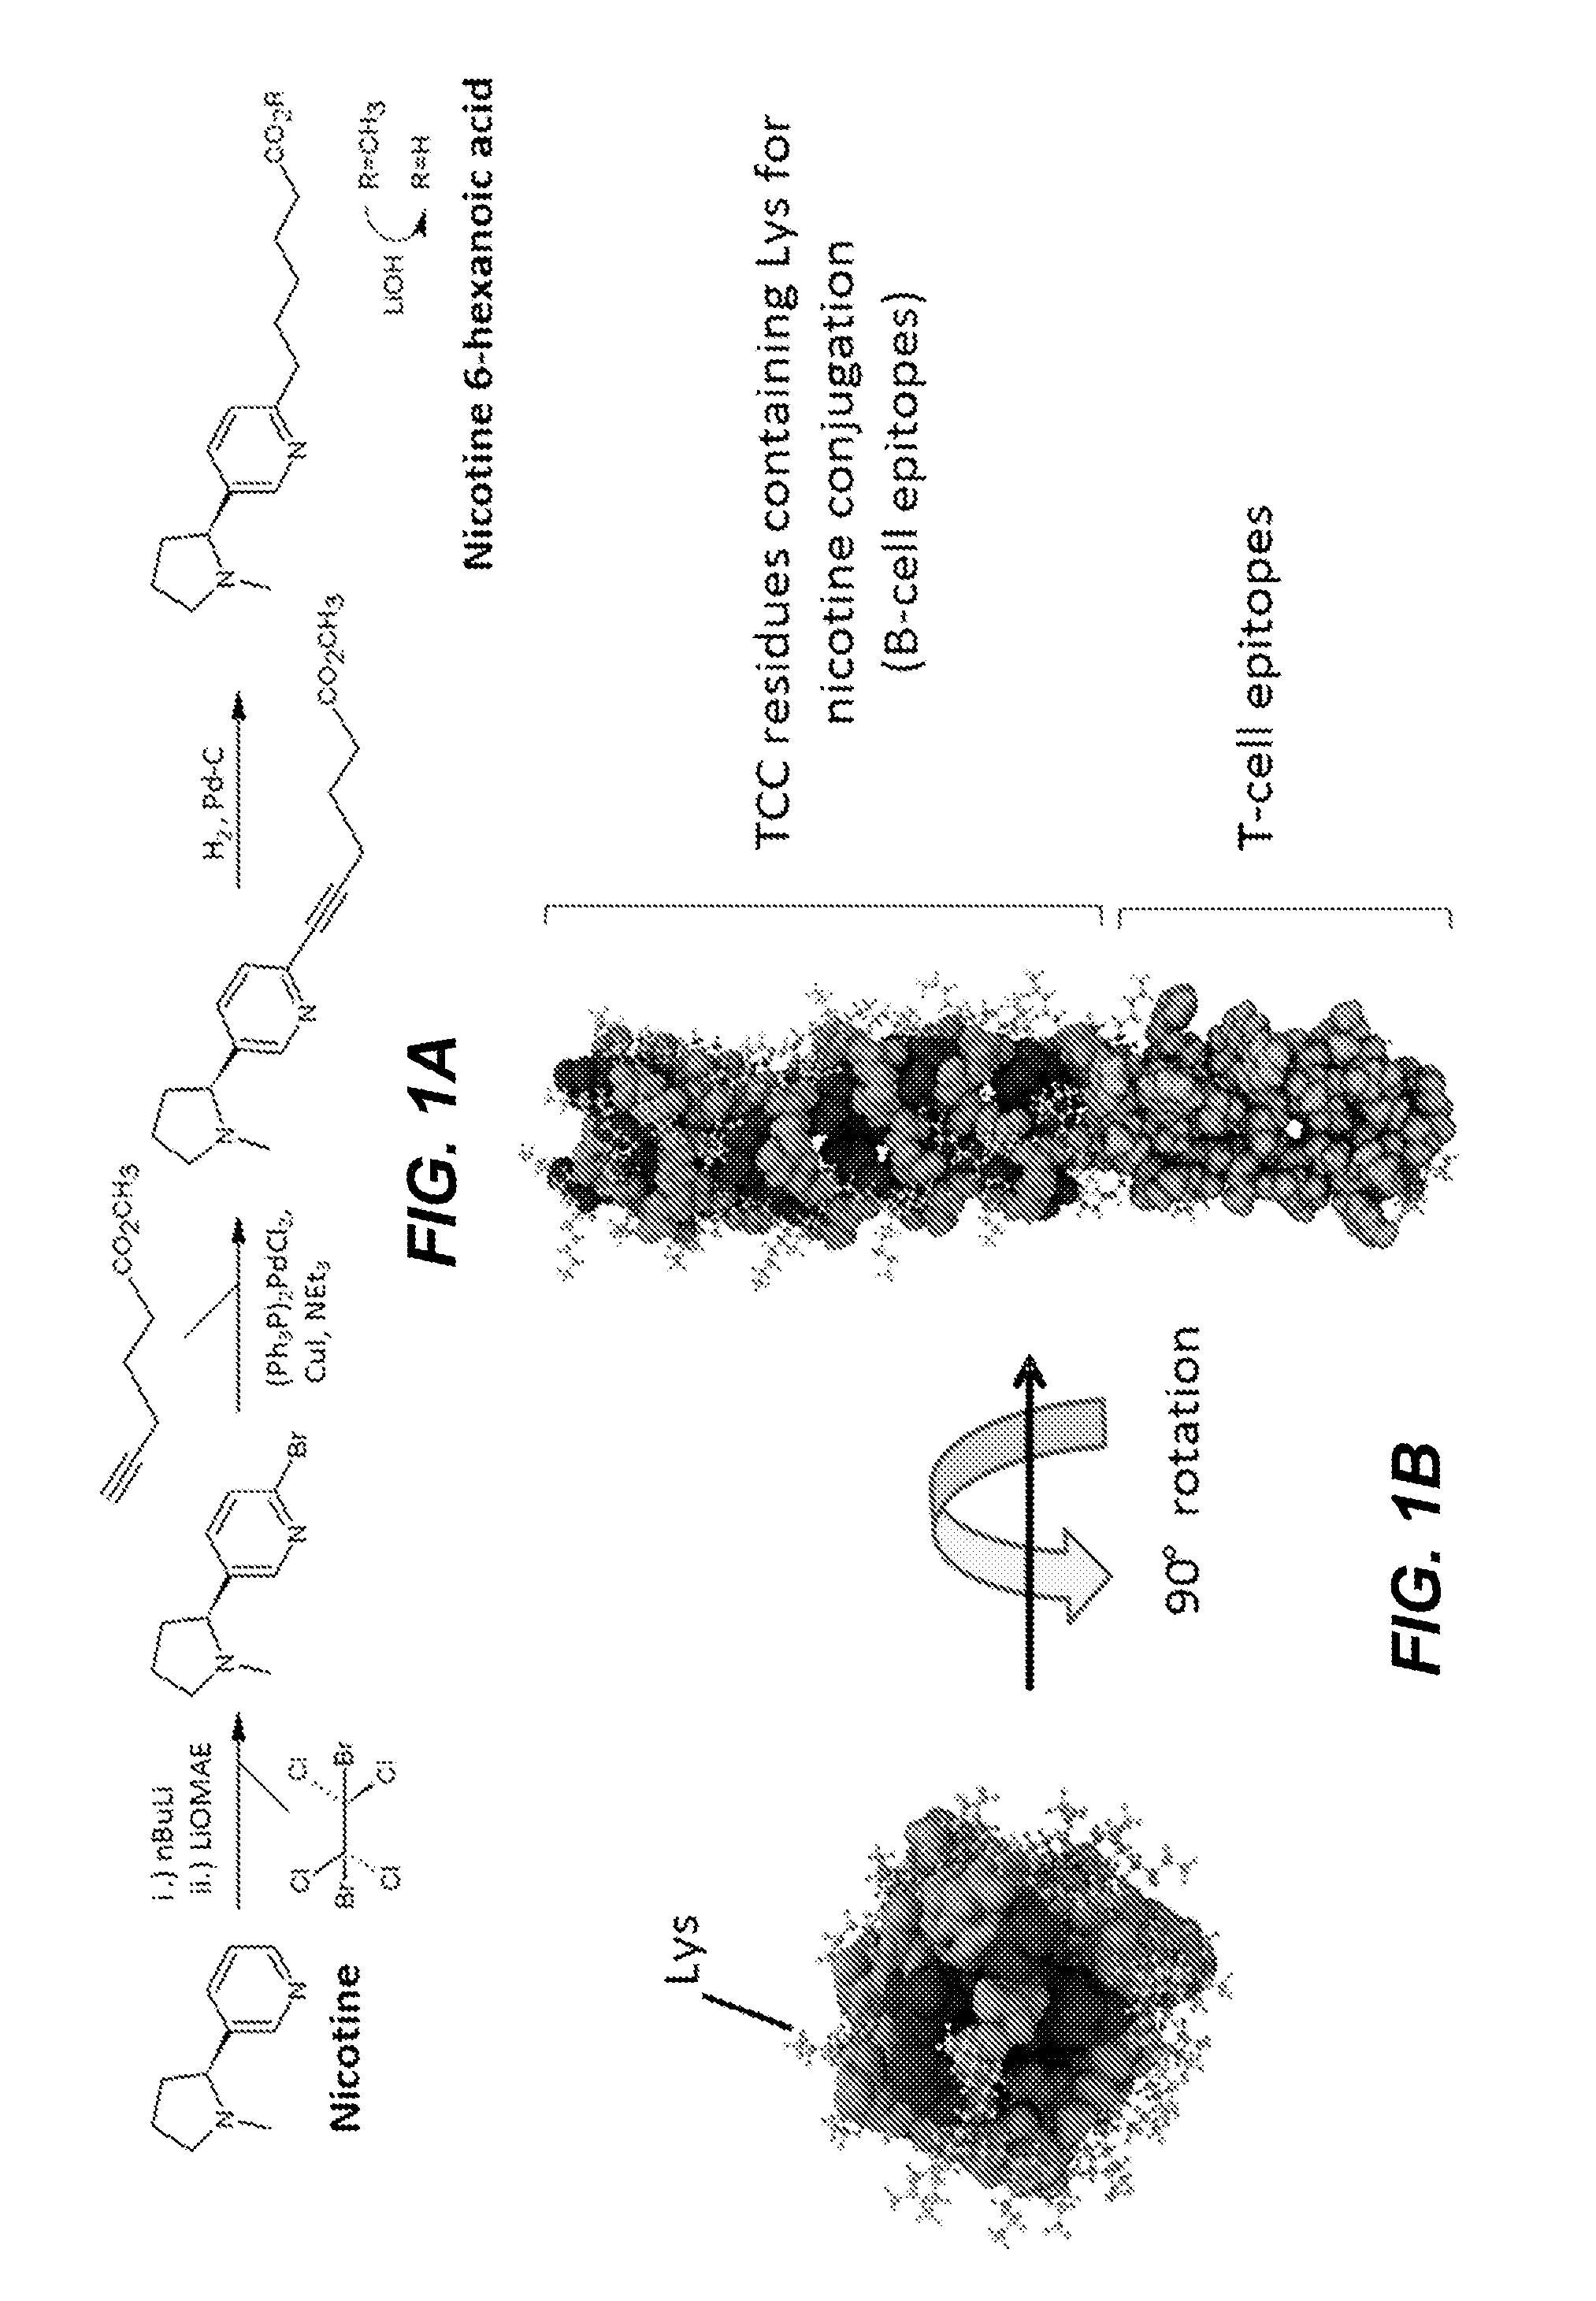 Synthetic hapten carrier compositions and methods